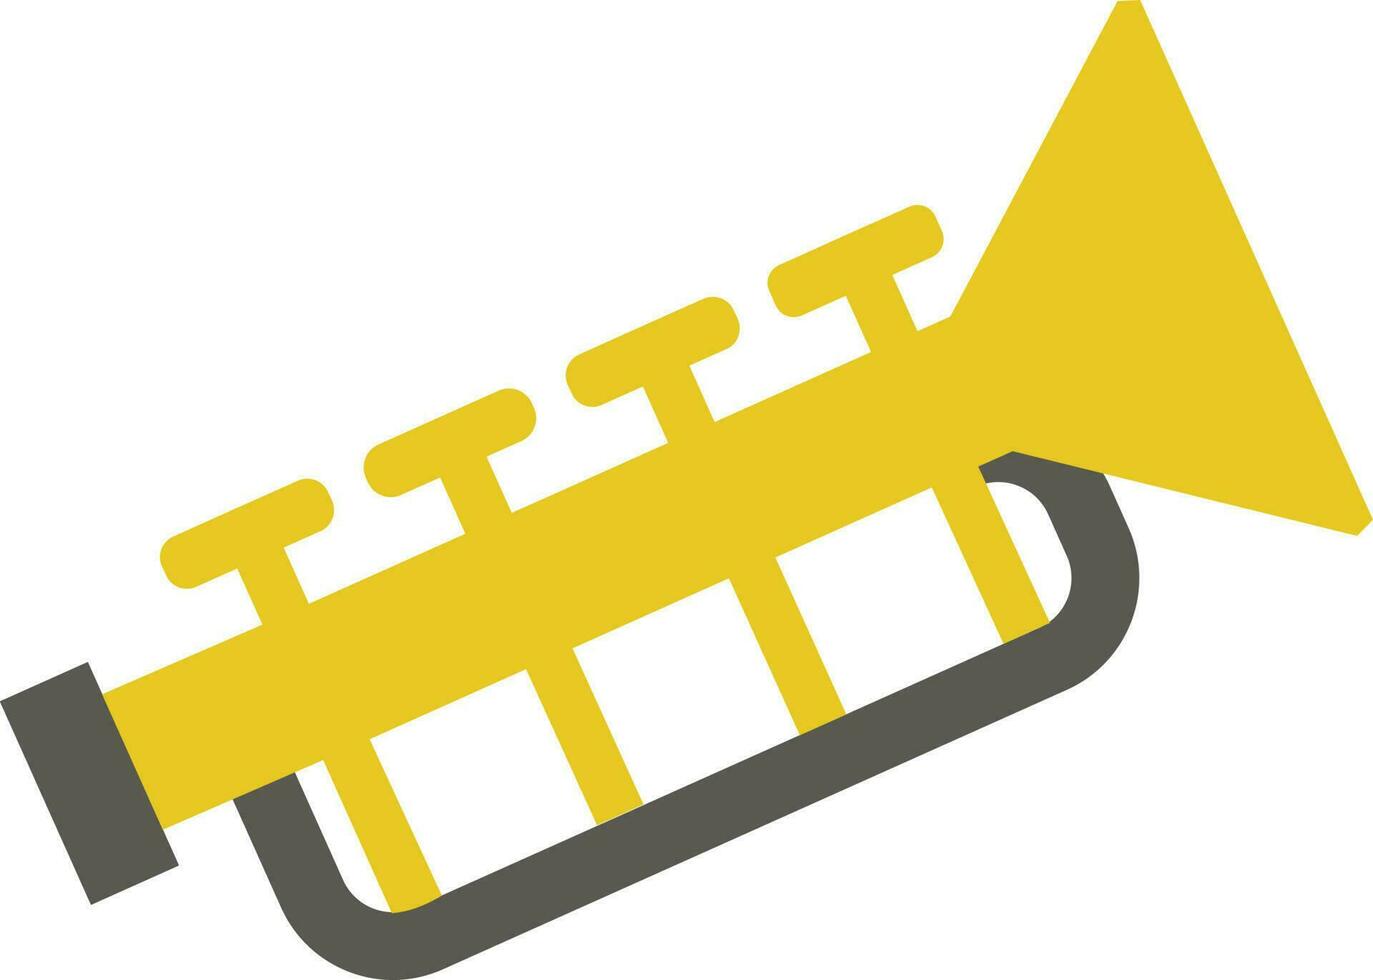 Trumpet music instrument in yellow and gray color. vector